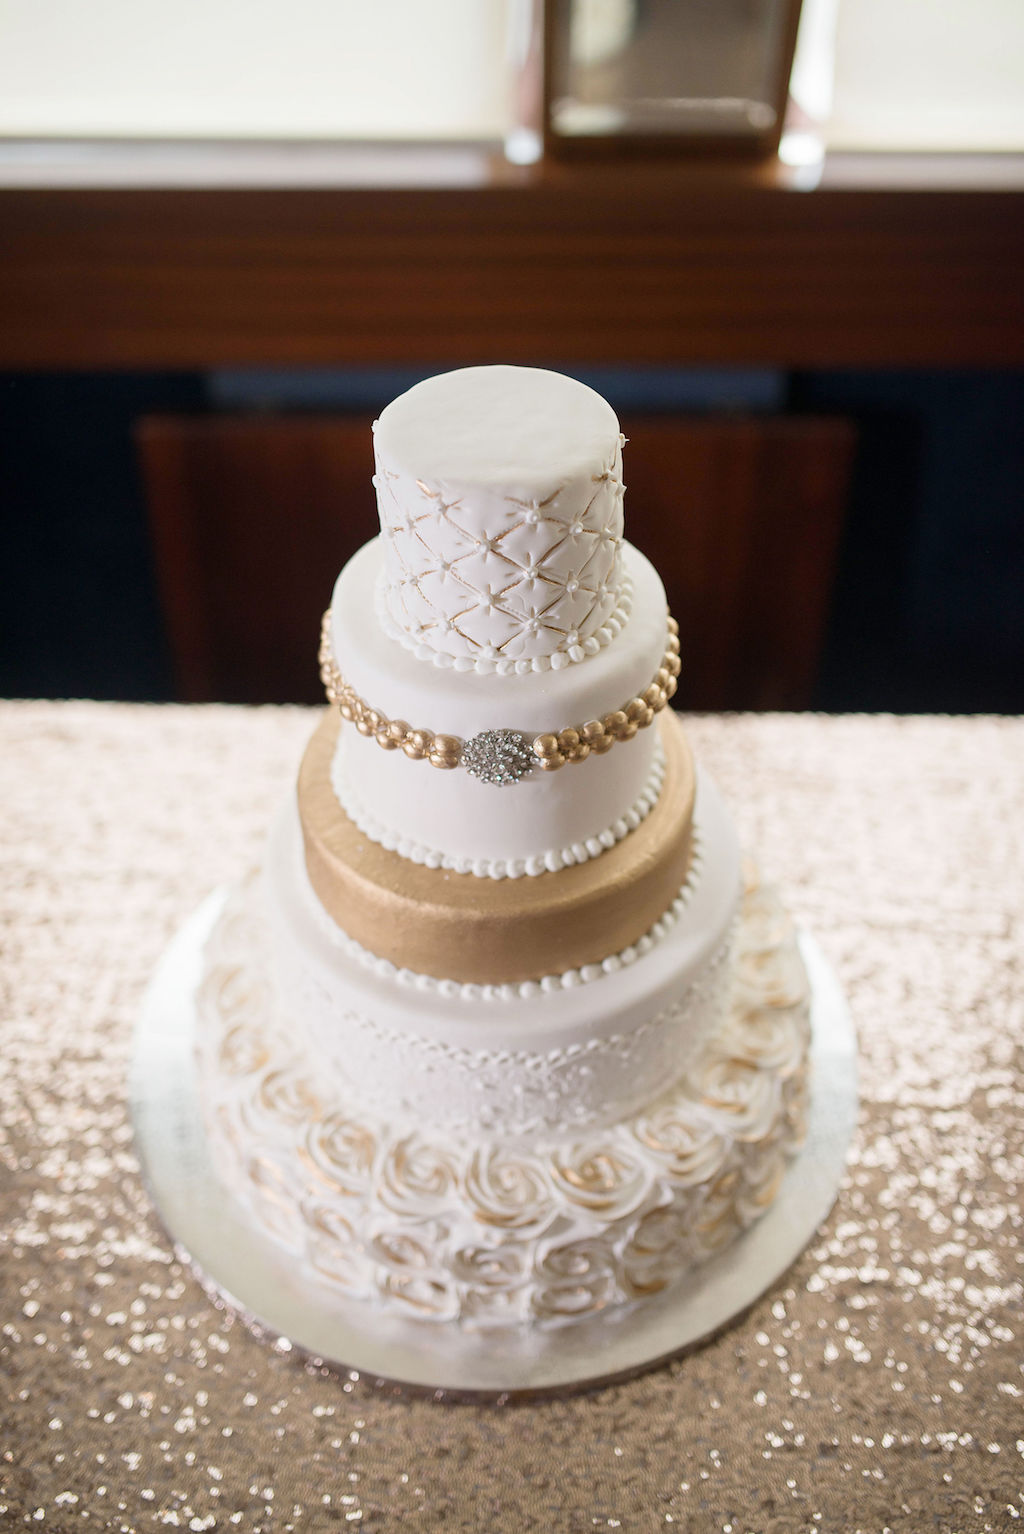 Elegant Five Tier White and Gold Wedding Cake with Rhinestone Brooch Accent | Tampa Bay Wedding Photographer Kristen Marie Photography